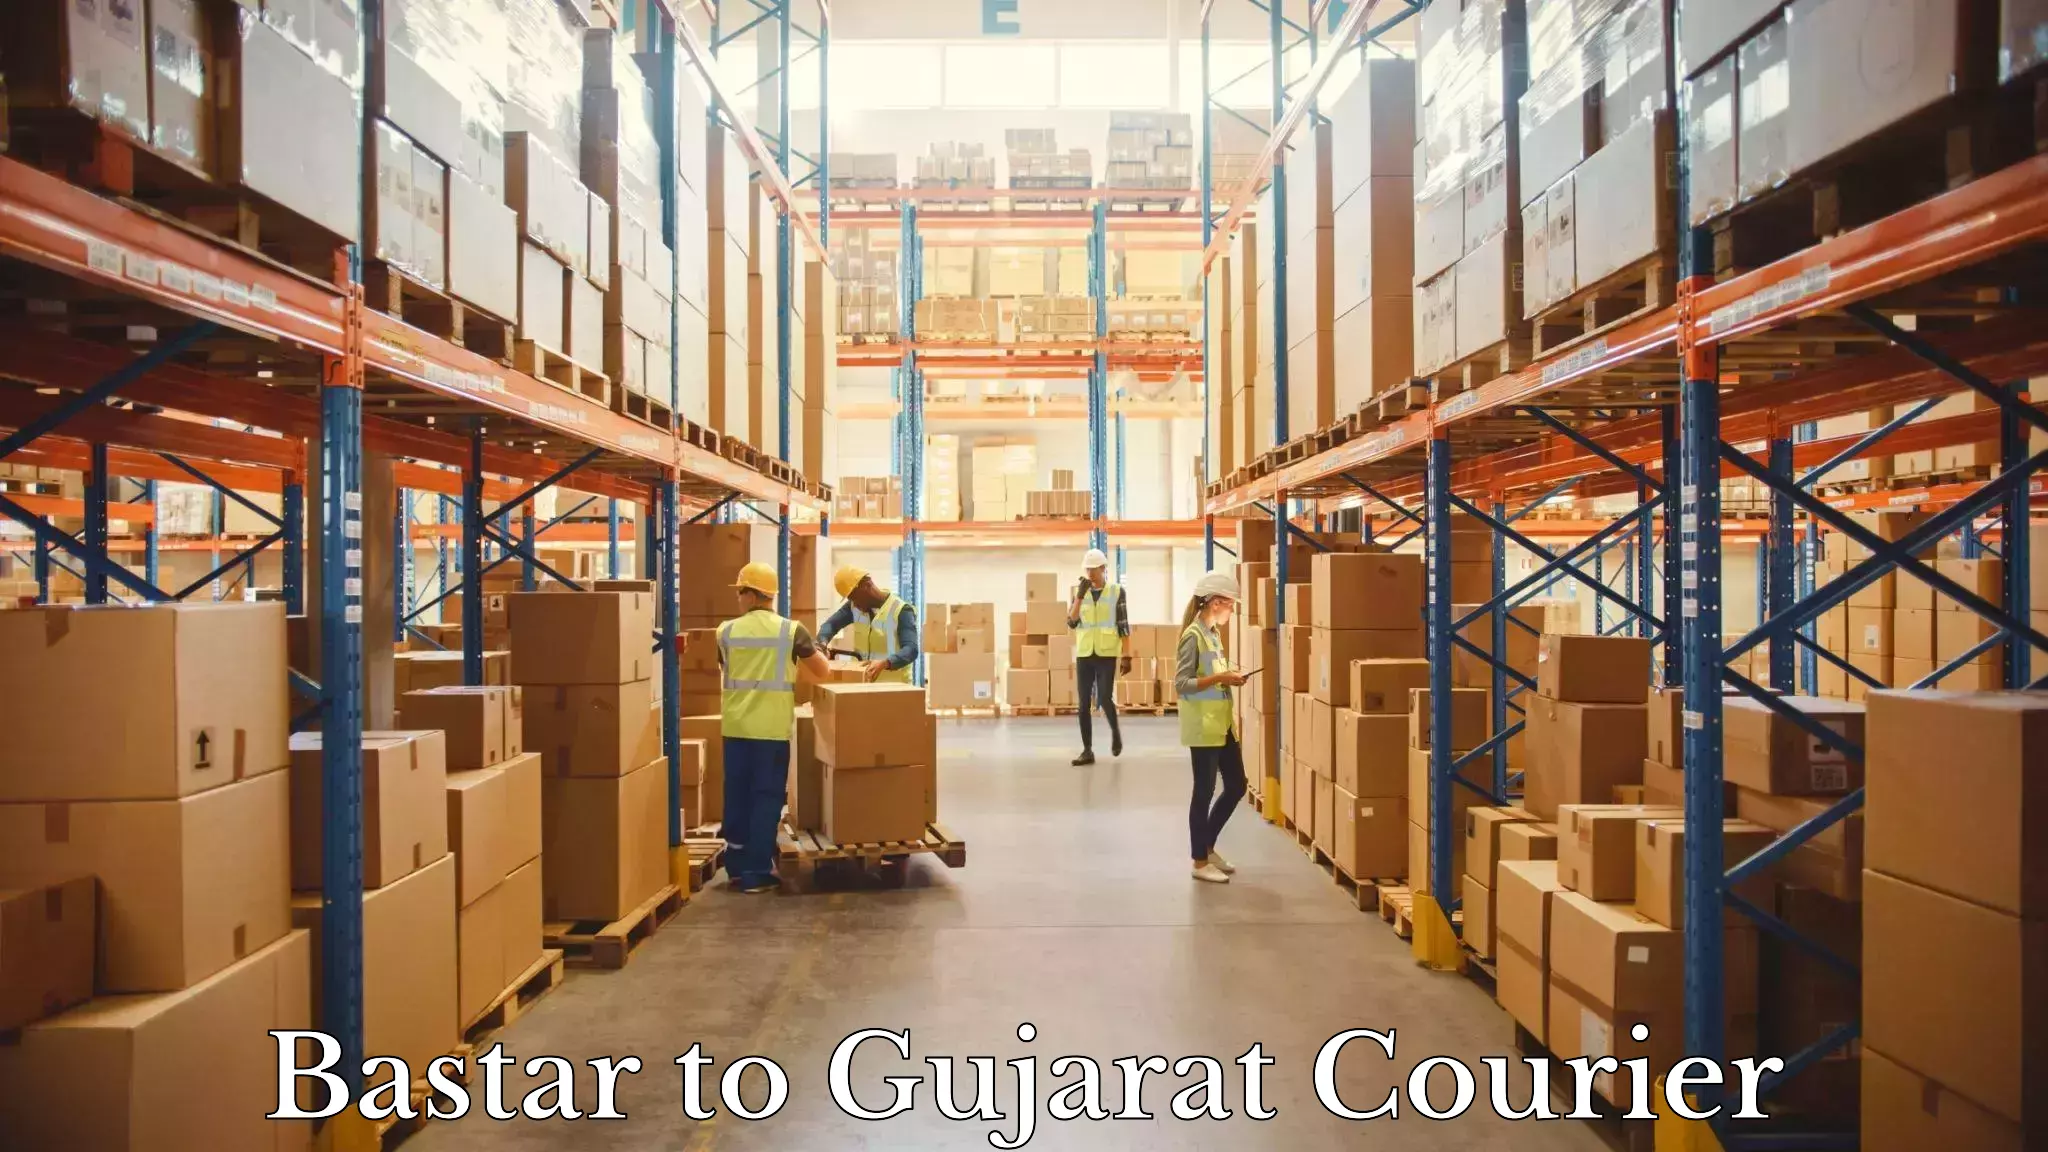 State-of-the-art courier technology Bastar to Ahmedabad